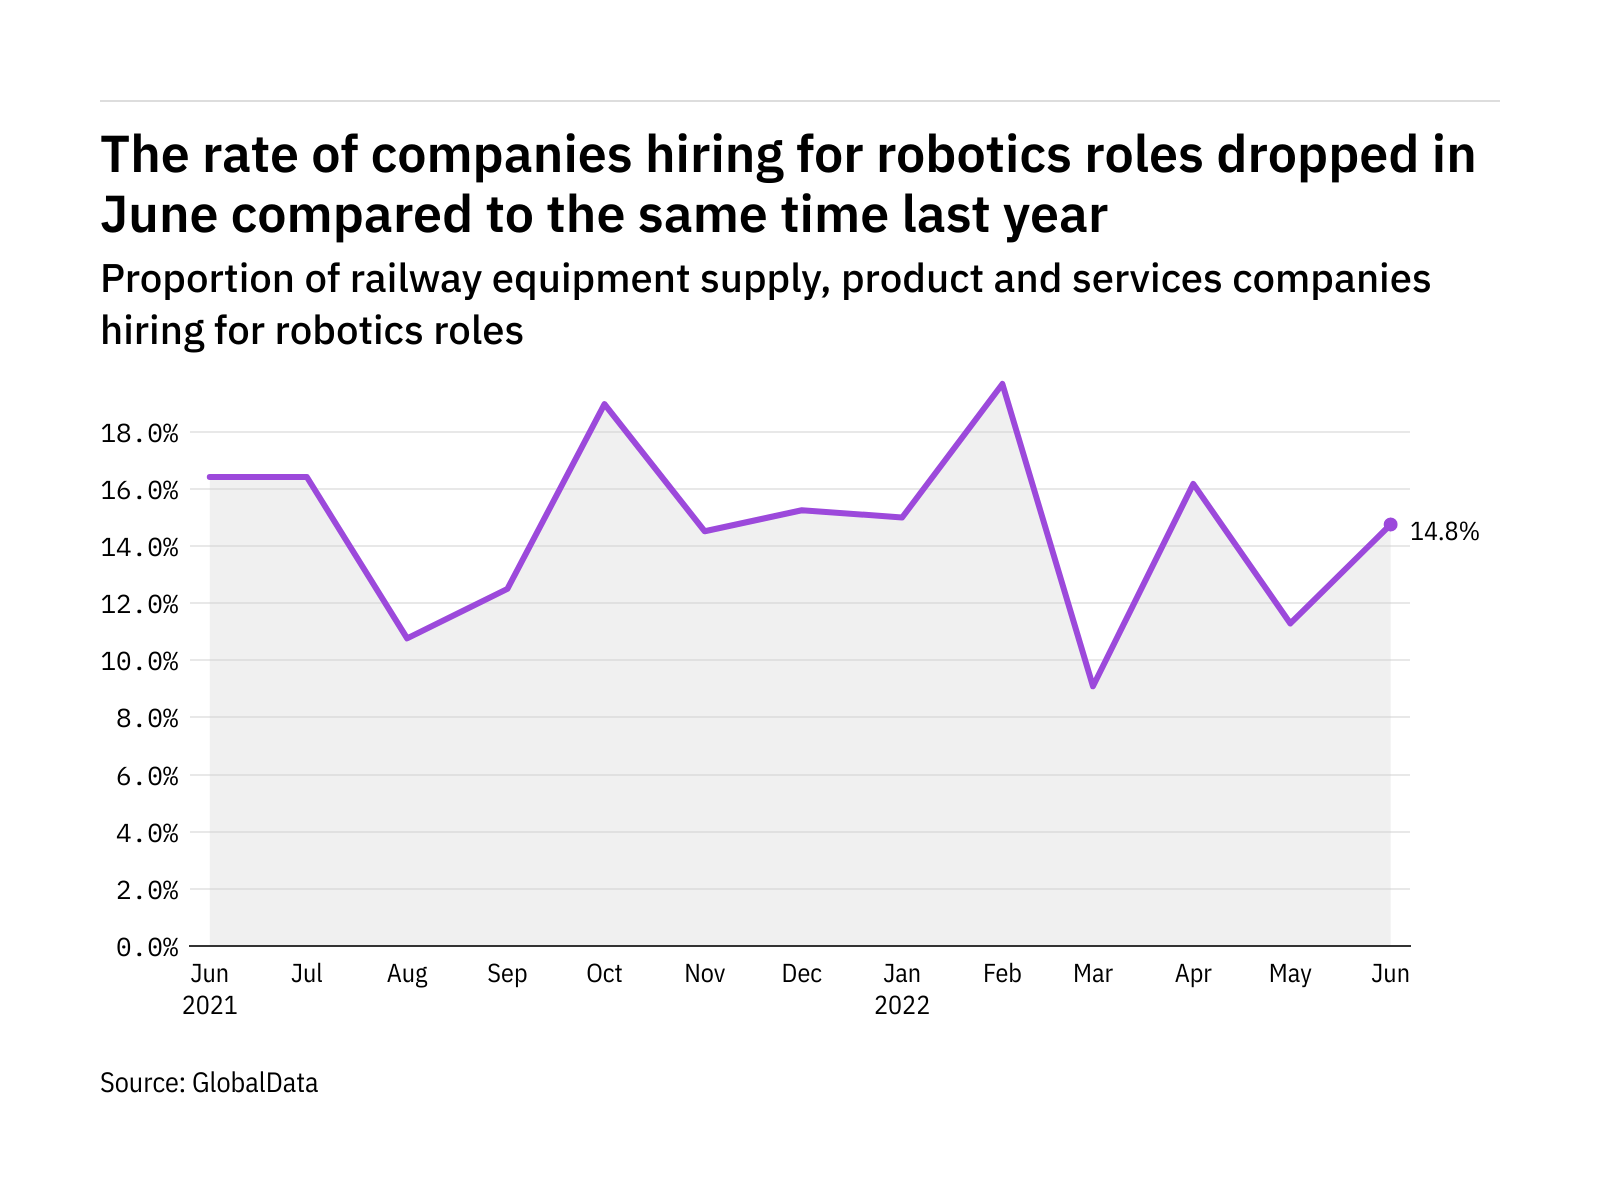 Robotics hiring levels in the railway industry dropped in June 2022